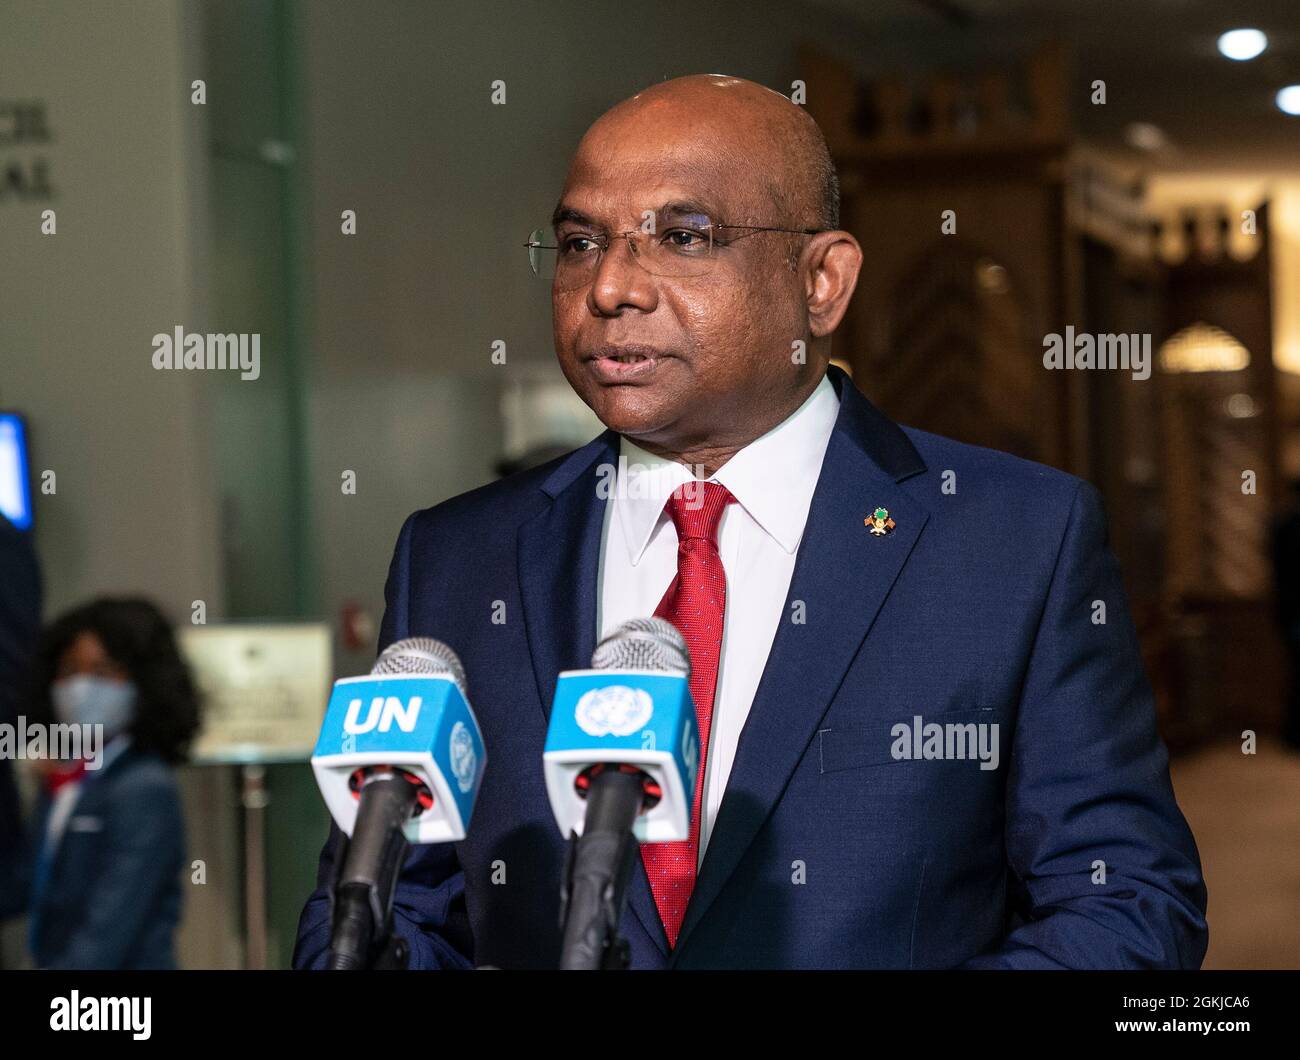 New York, USA. 14th Sep, 2021. Abdulla Shahid conducts press conference after elected as President of 76th General Assembly at UN Headquarters in New York on September 14, 2021. Abdulla Shahid is currently Minister of Foreign Affairs for the Maldives and was elected as President of 76th session of General Assembly on September 14, 2021. (Photo by Lev Radin/Sipa USA) Credit: Sipa USA/Alamy Live News Stock Photo